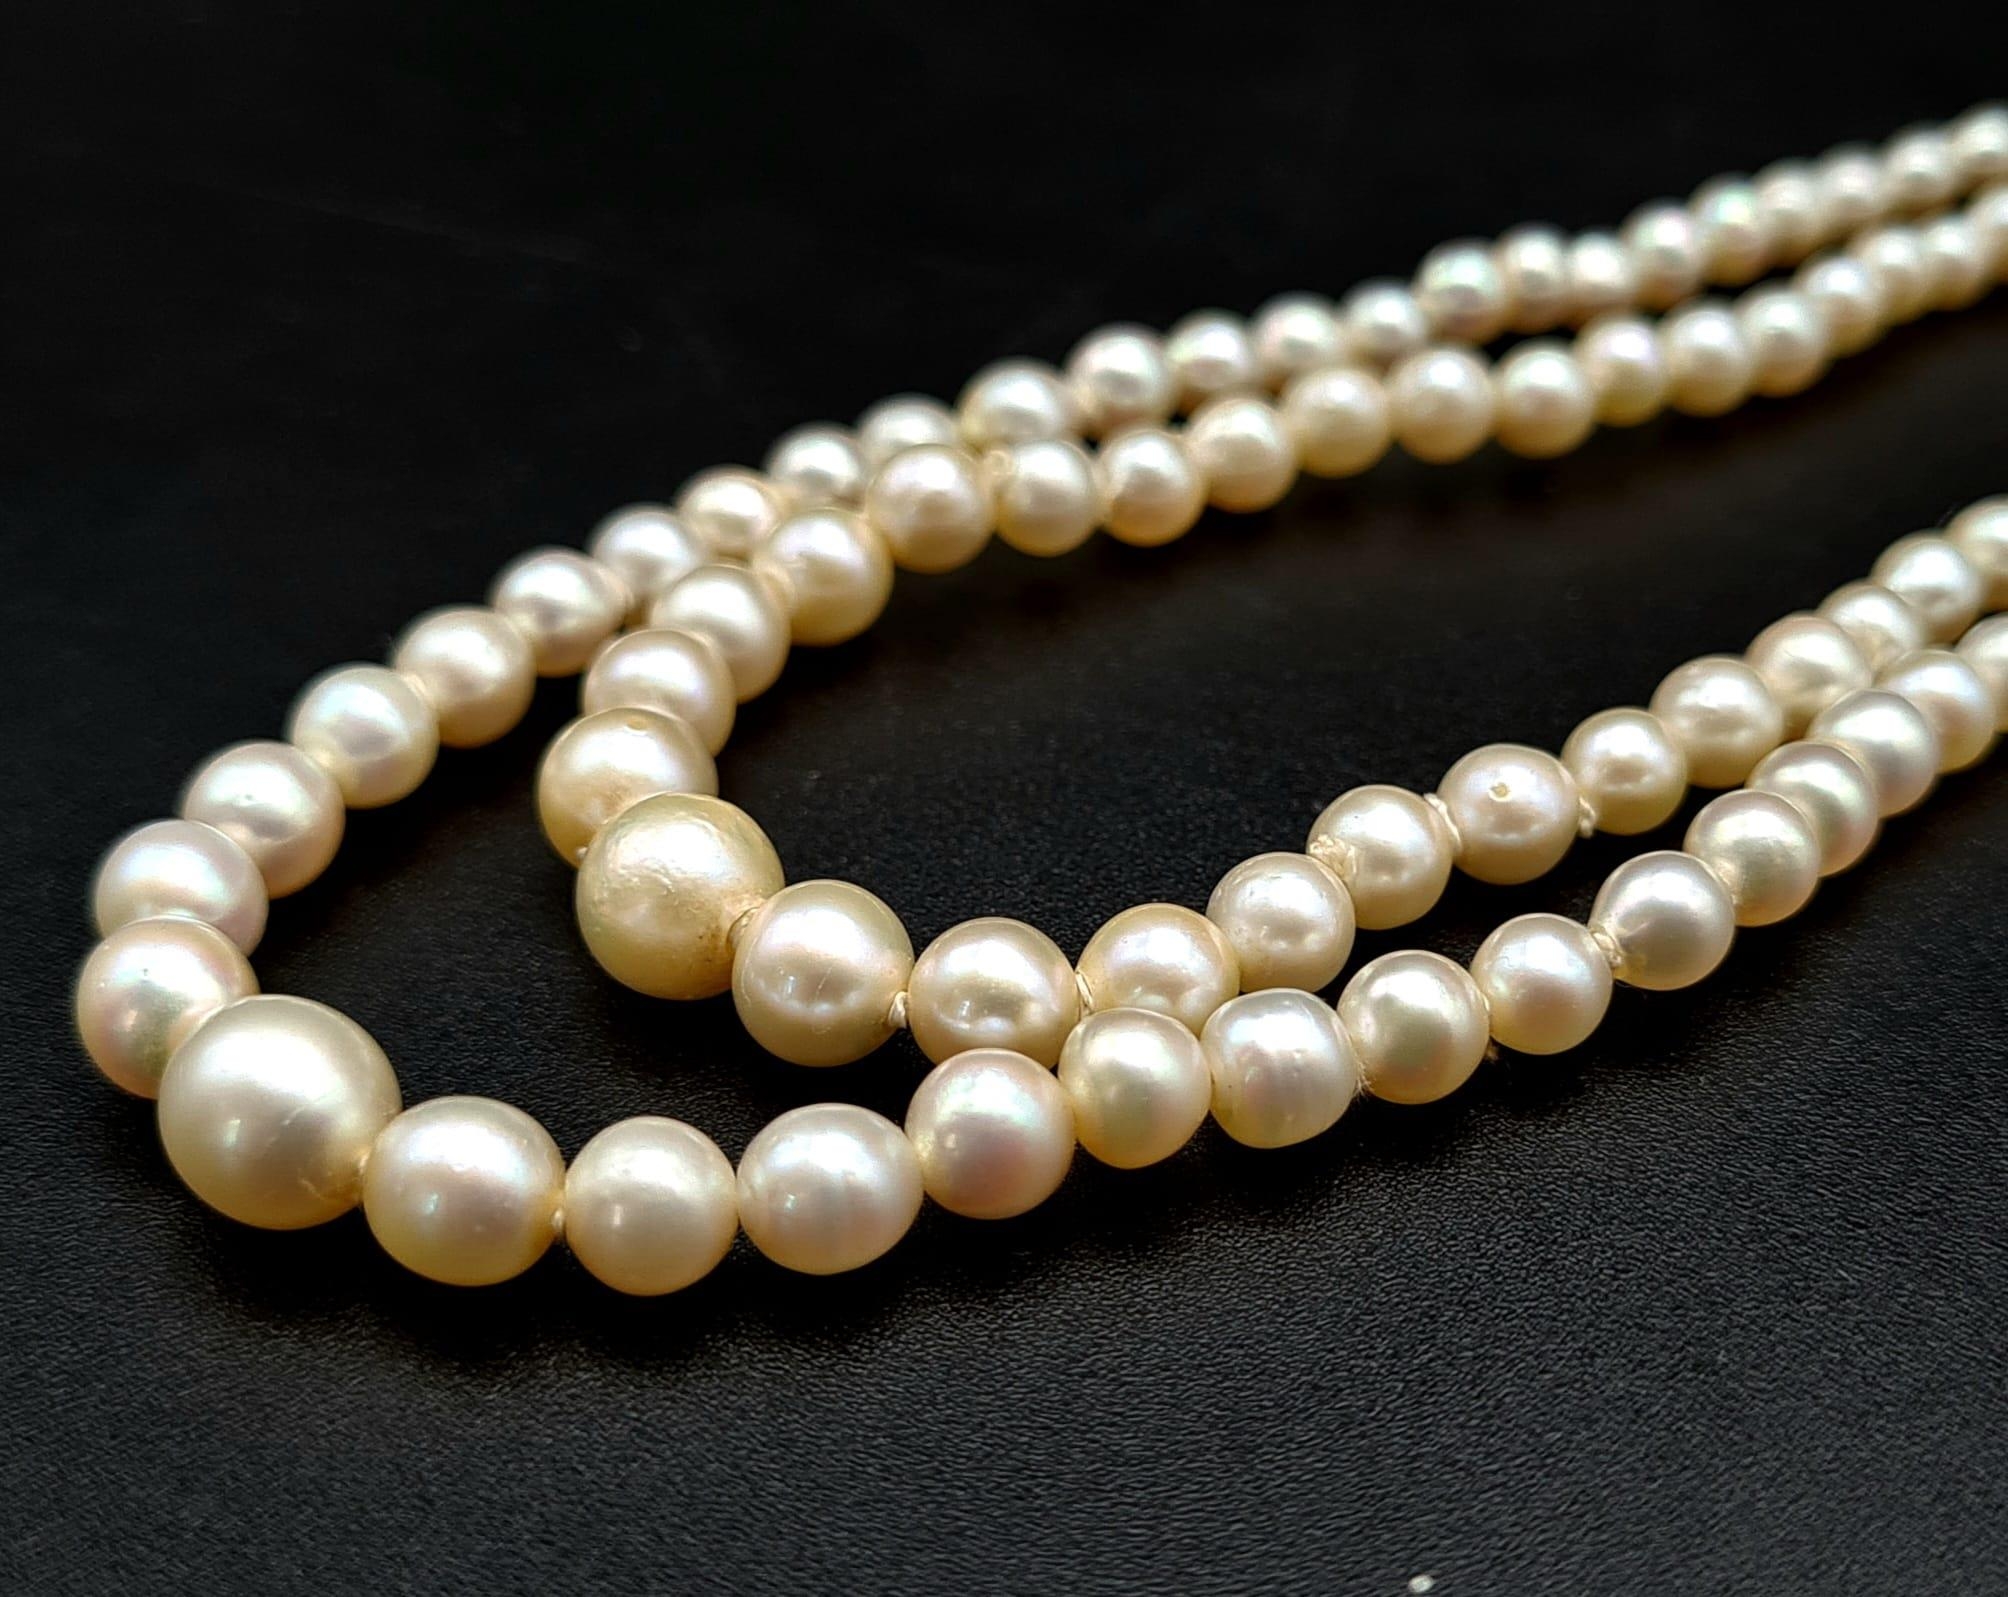 A Vintage Double Strand Graduated Pearl Necklace with White Stone Clasp. 40cm. - Image 2 of 5